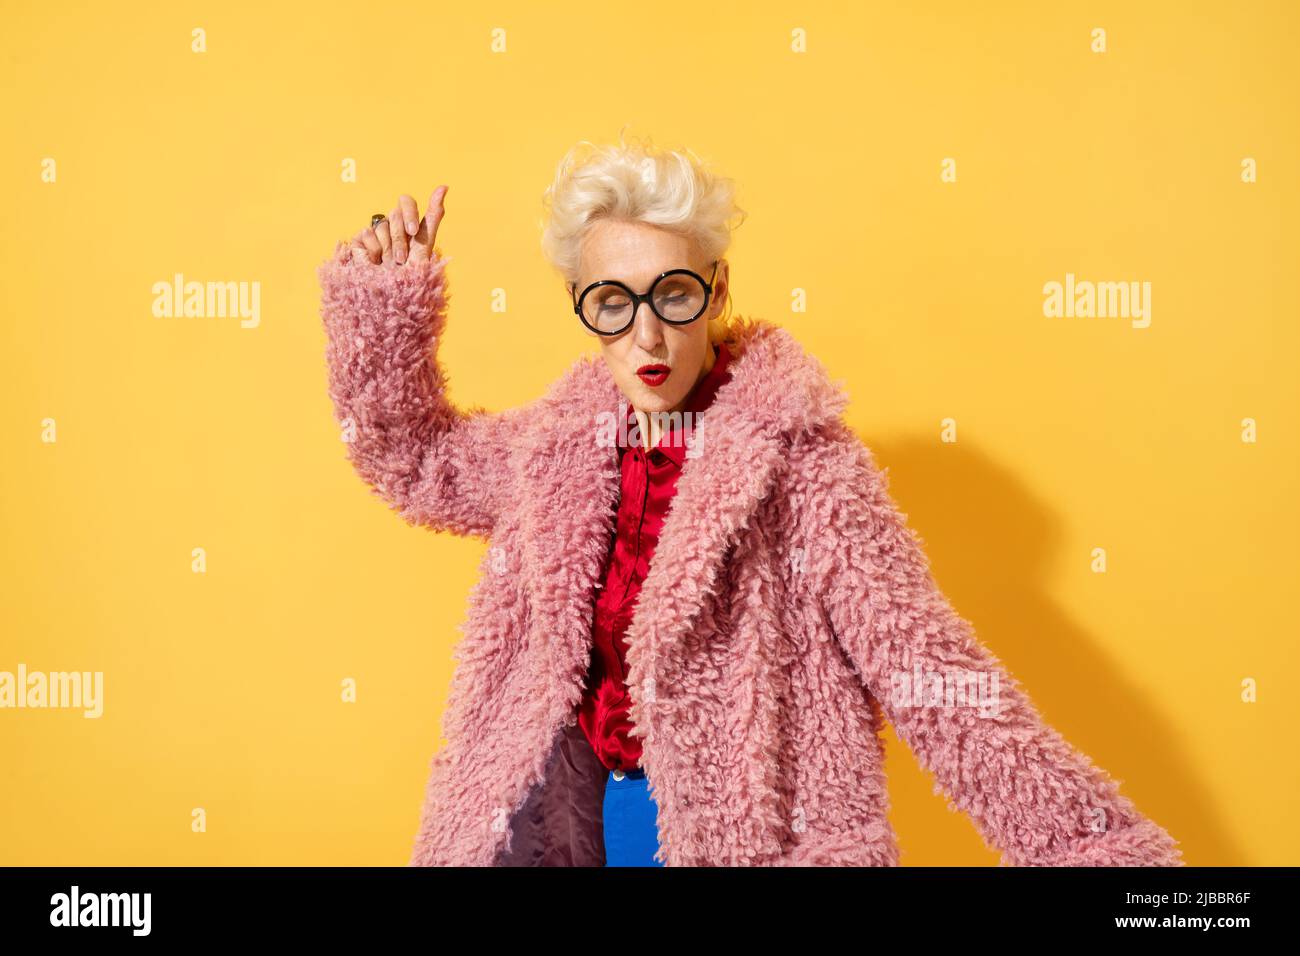 Happy and playful mature woman dancing, smiling and having fun. Photo of elderly woman above 70 years old in stylish outfit on yellow background Stock Photo